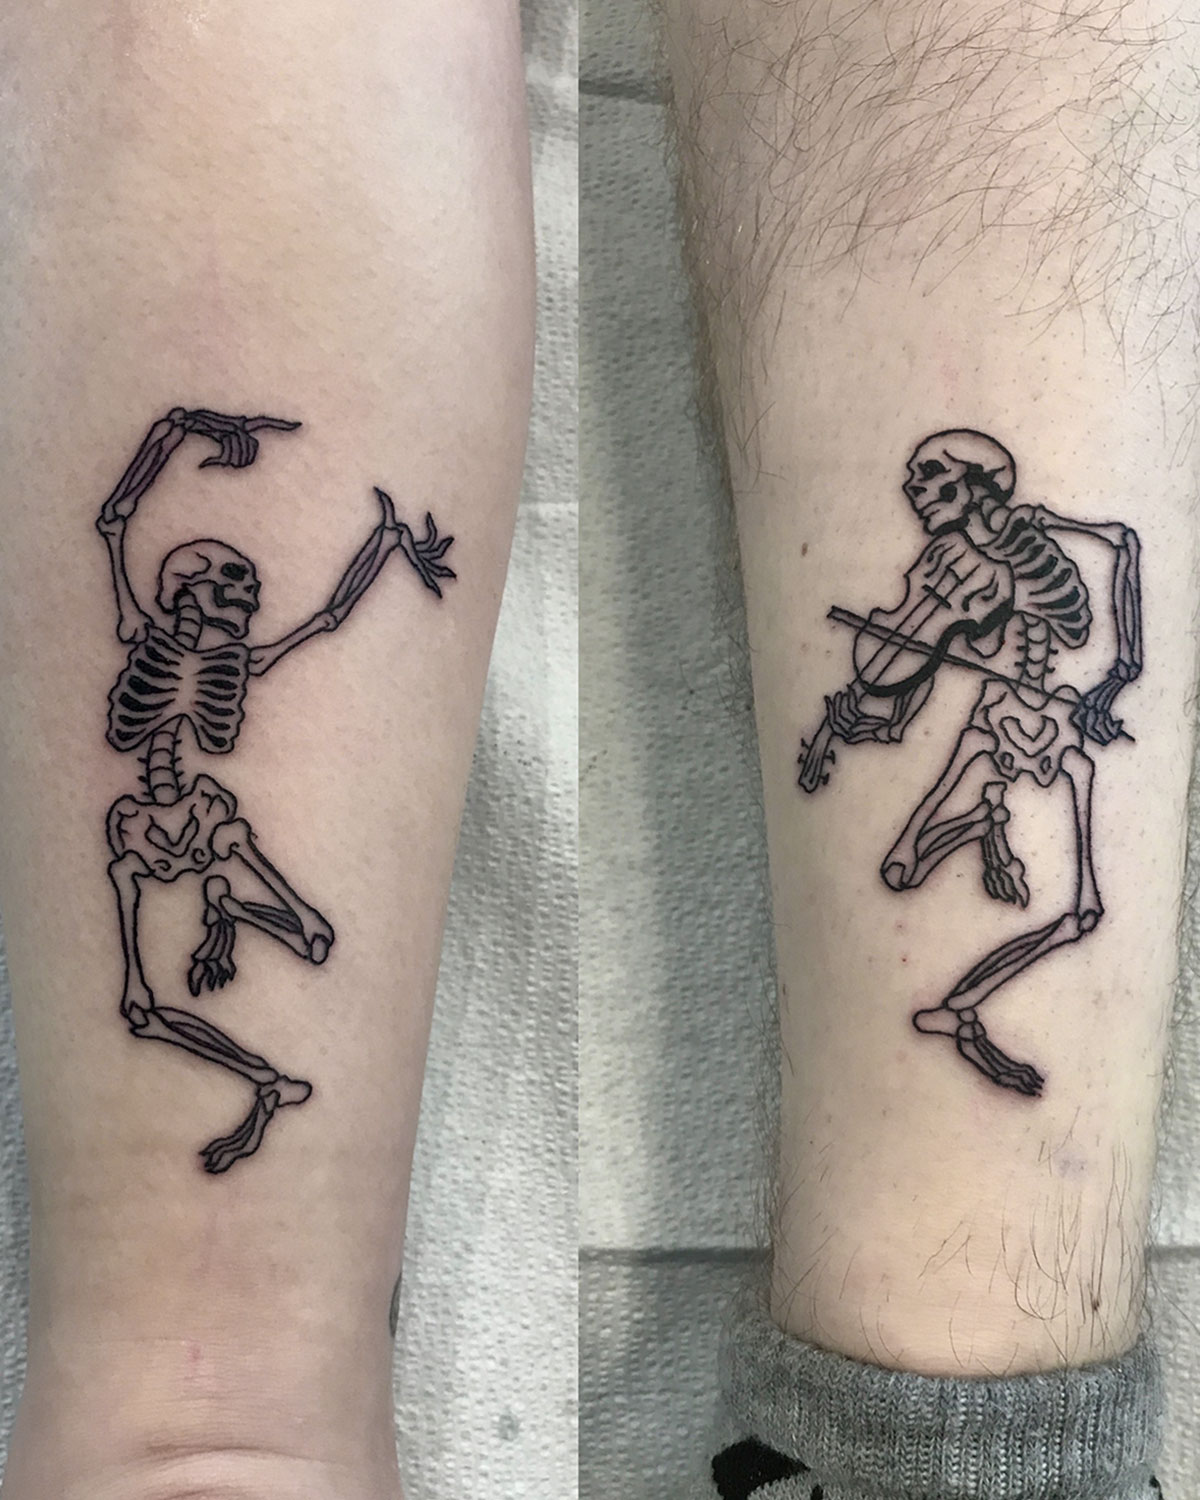 25 year old single needle skeleton Other tattoos are 1 to 15 years old   Scrolller